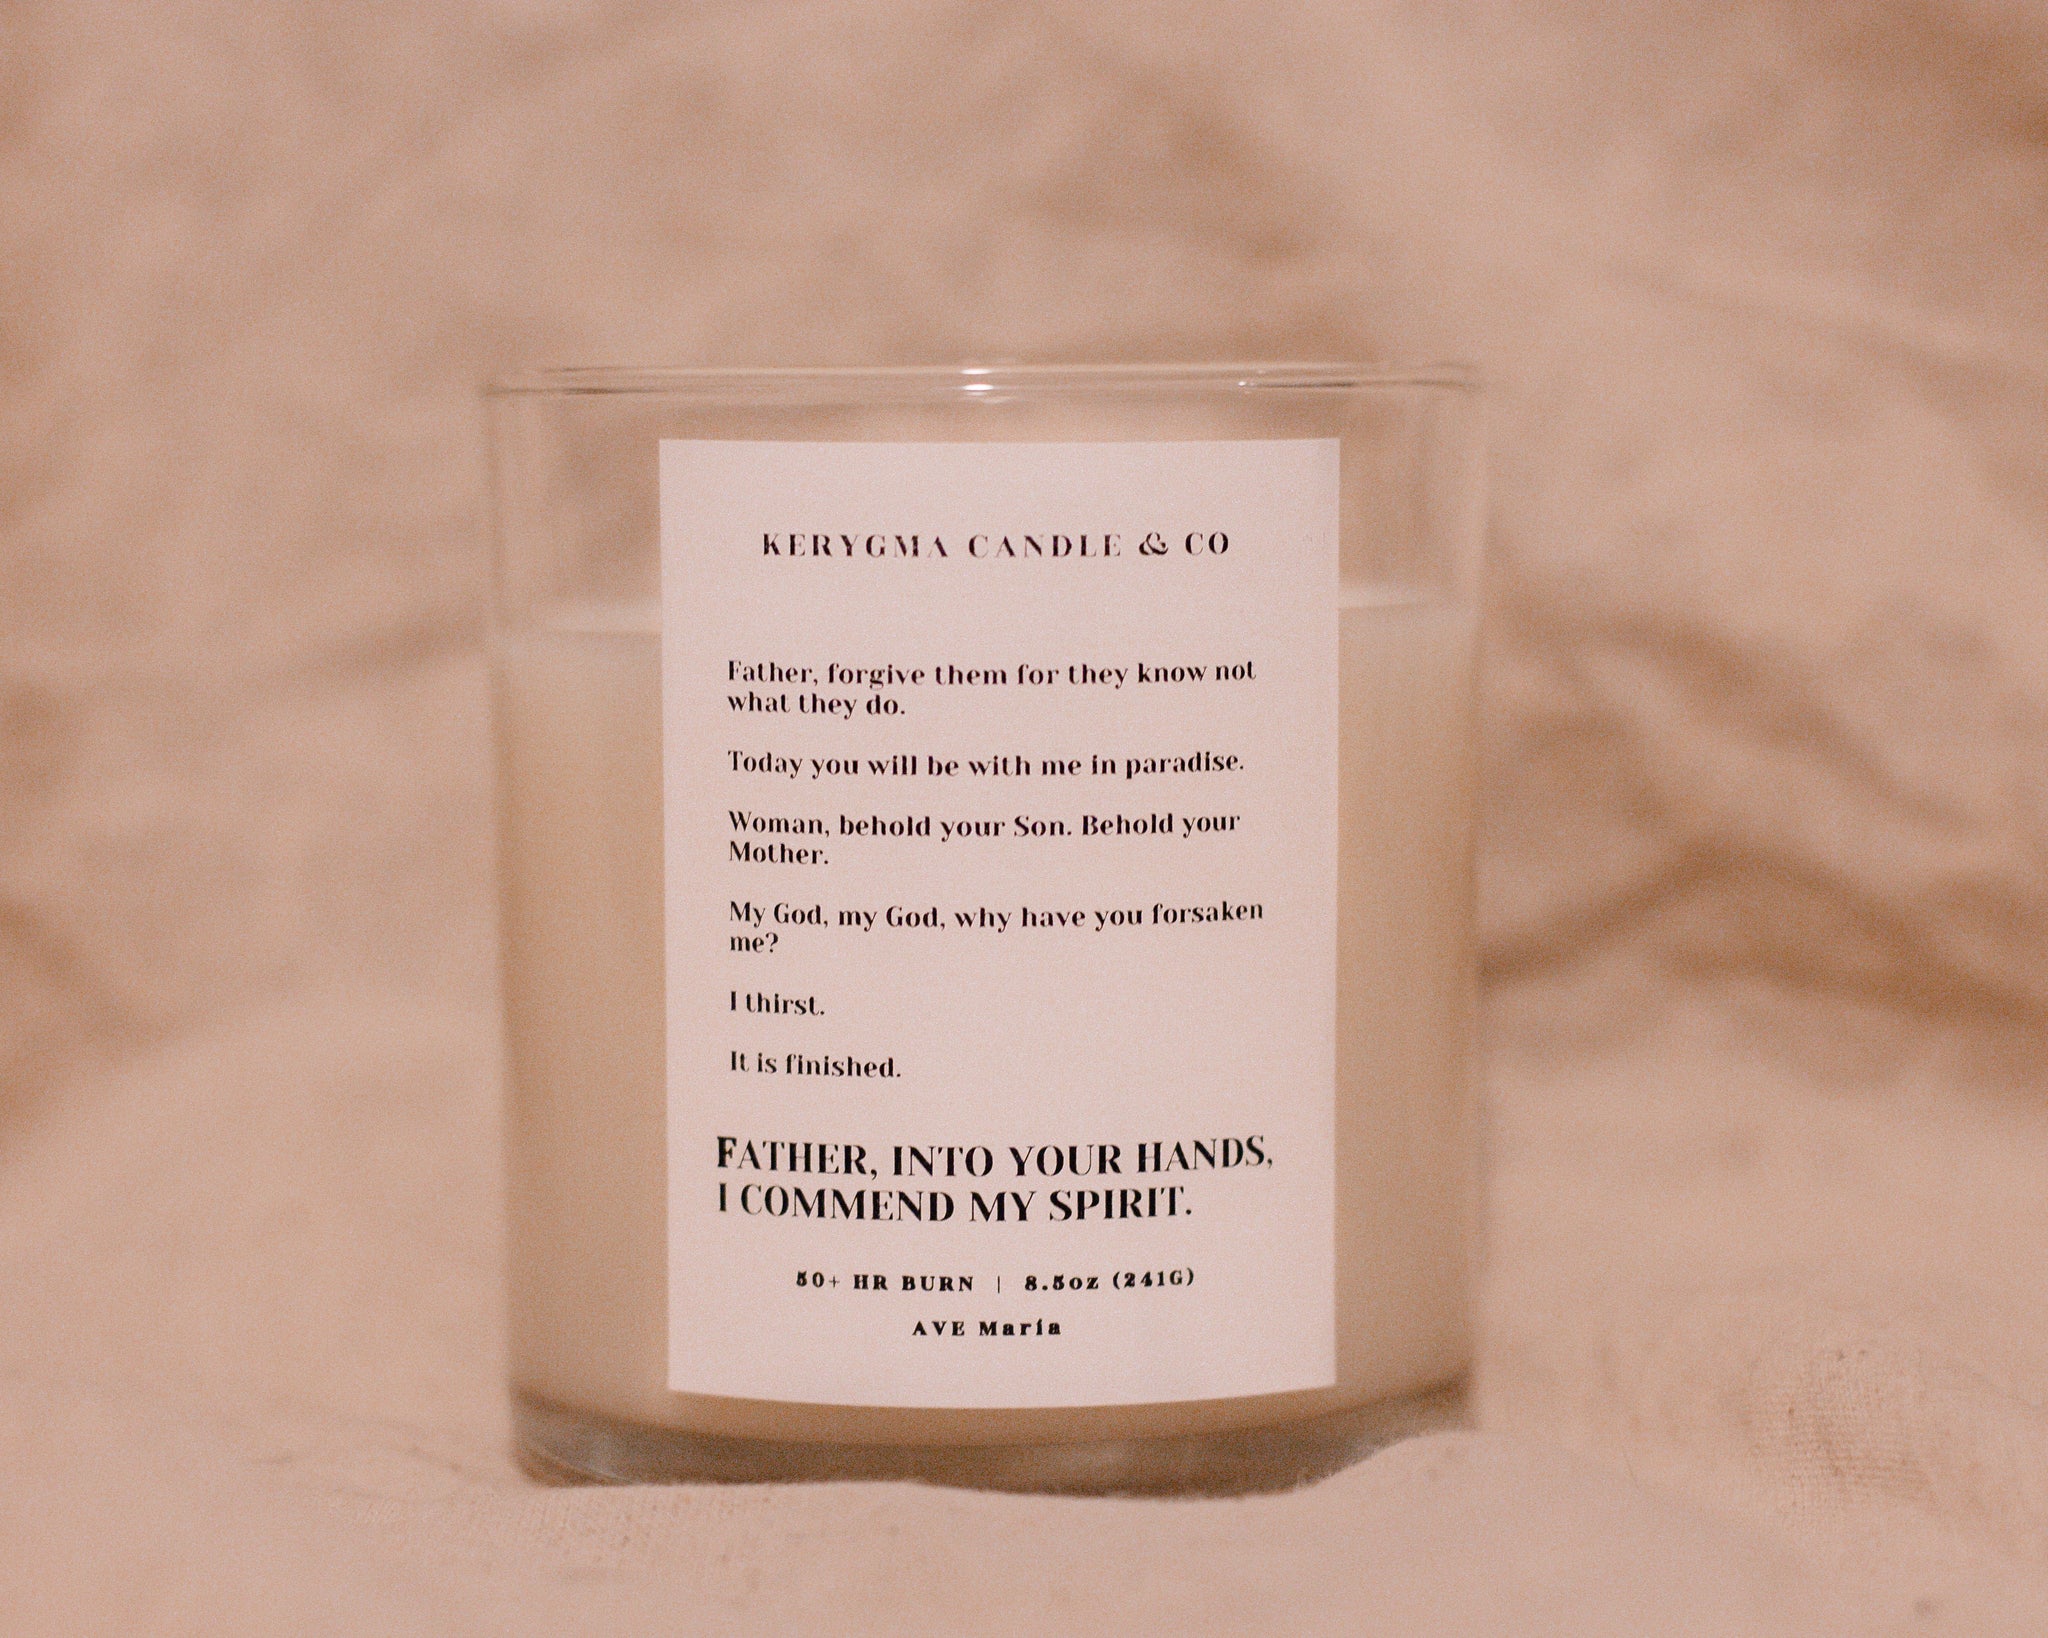 7 last words, candle